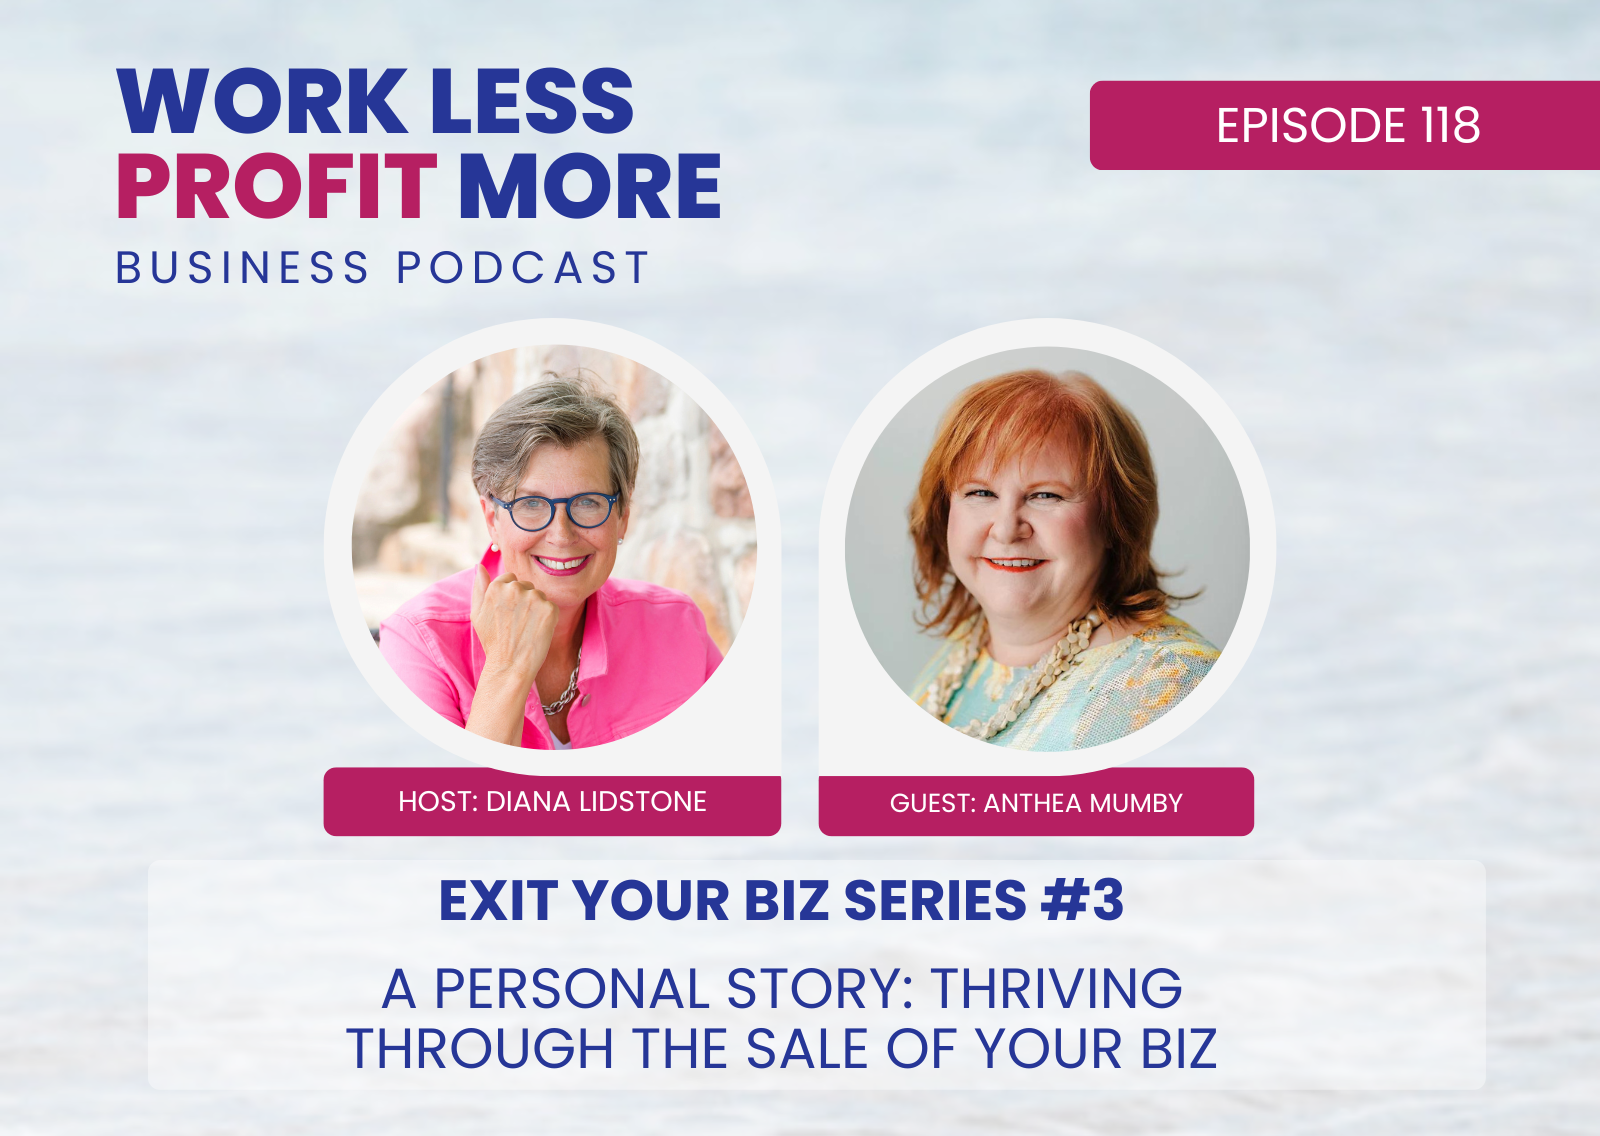 A Personal Story- Thriving Through the Sale of Your Biz